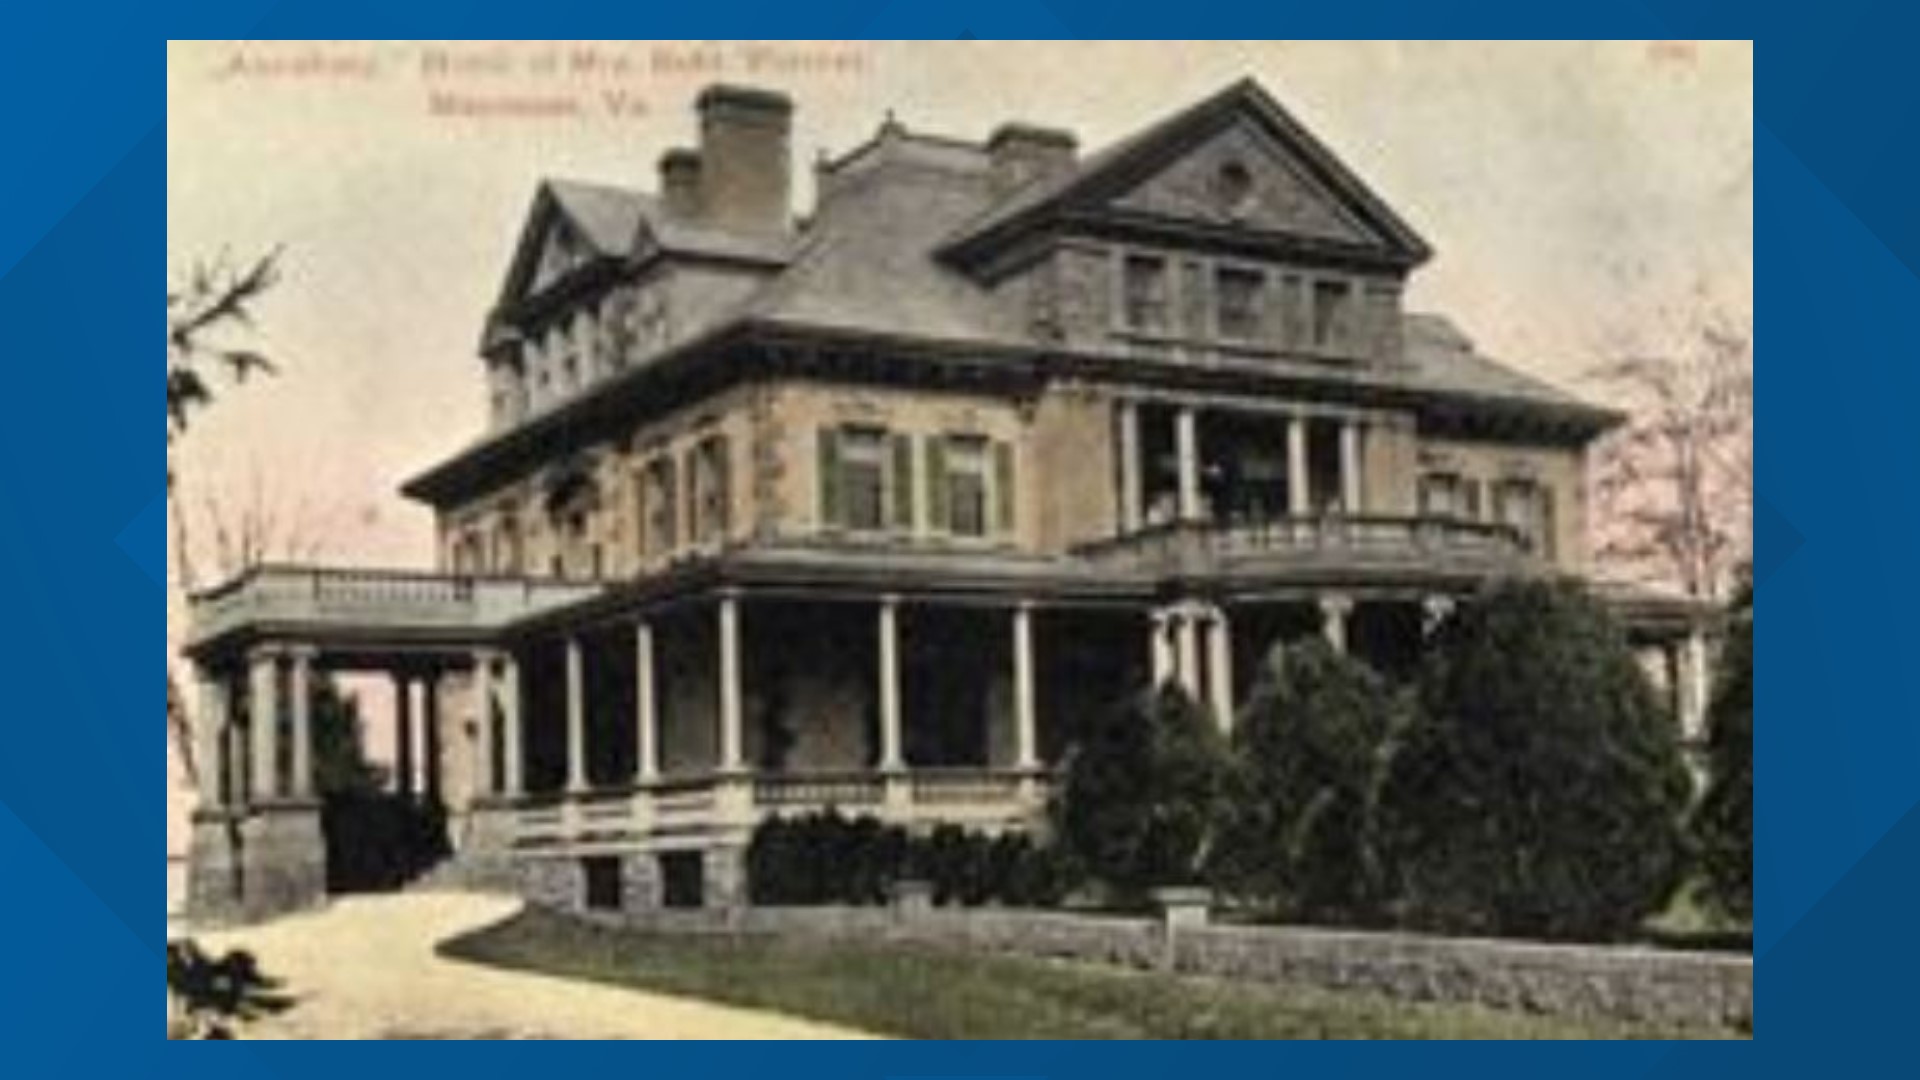 When it's hot, most of us want to get cool. 
However, that was not always possible. Annaburg Manor in Manassas was one of the first homes to have A/C.